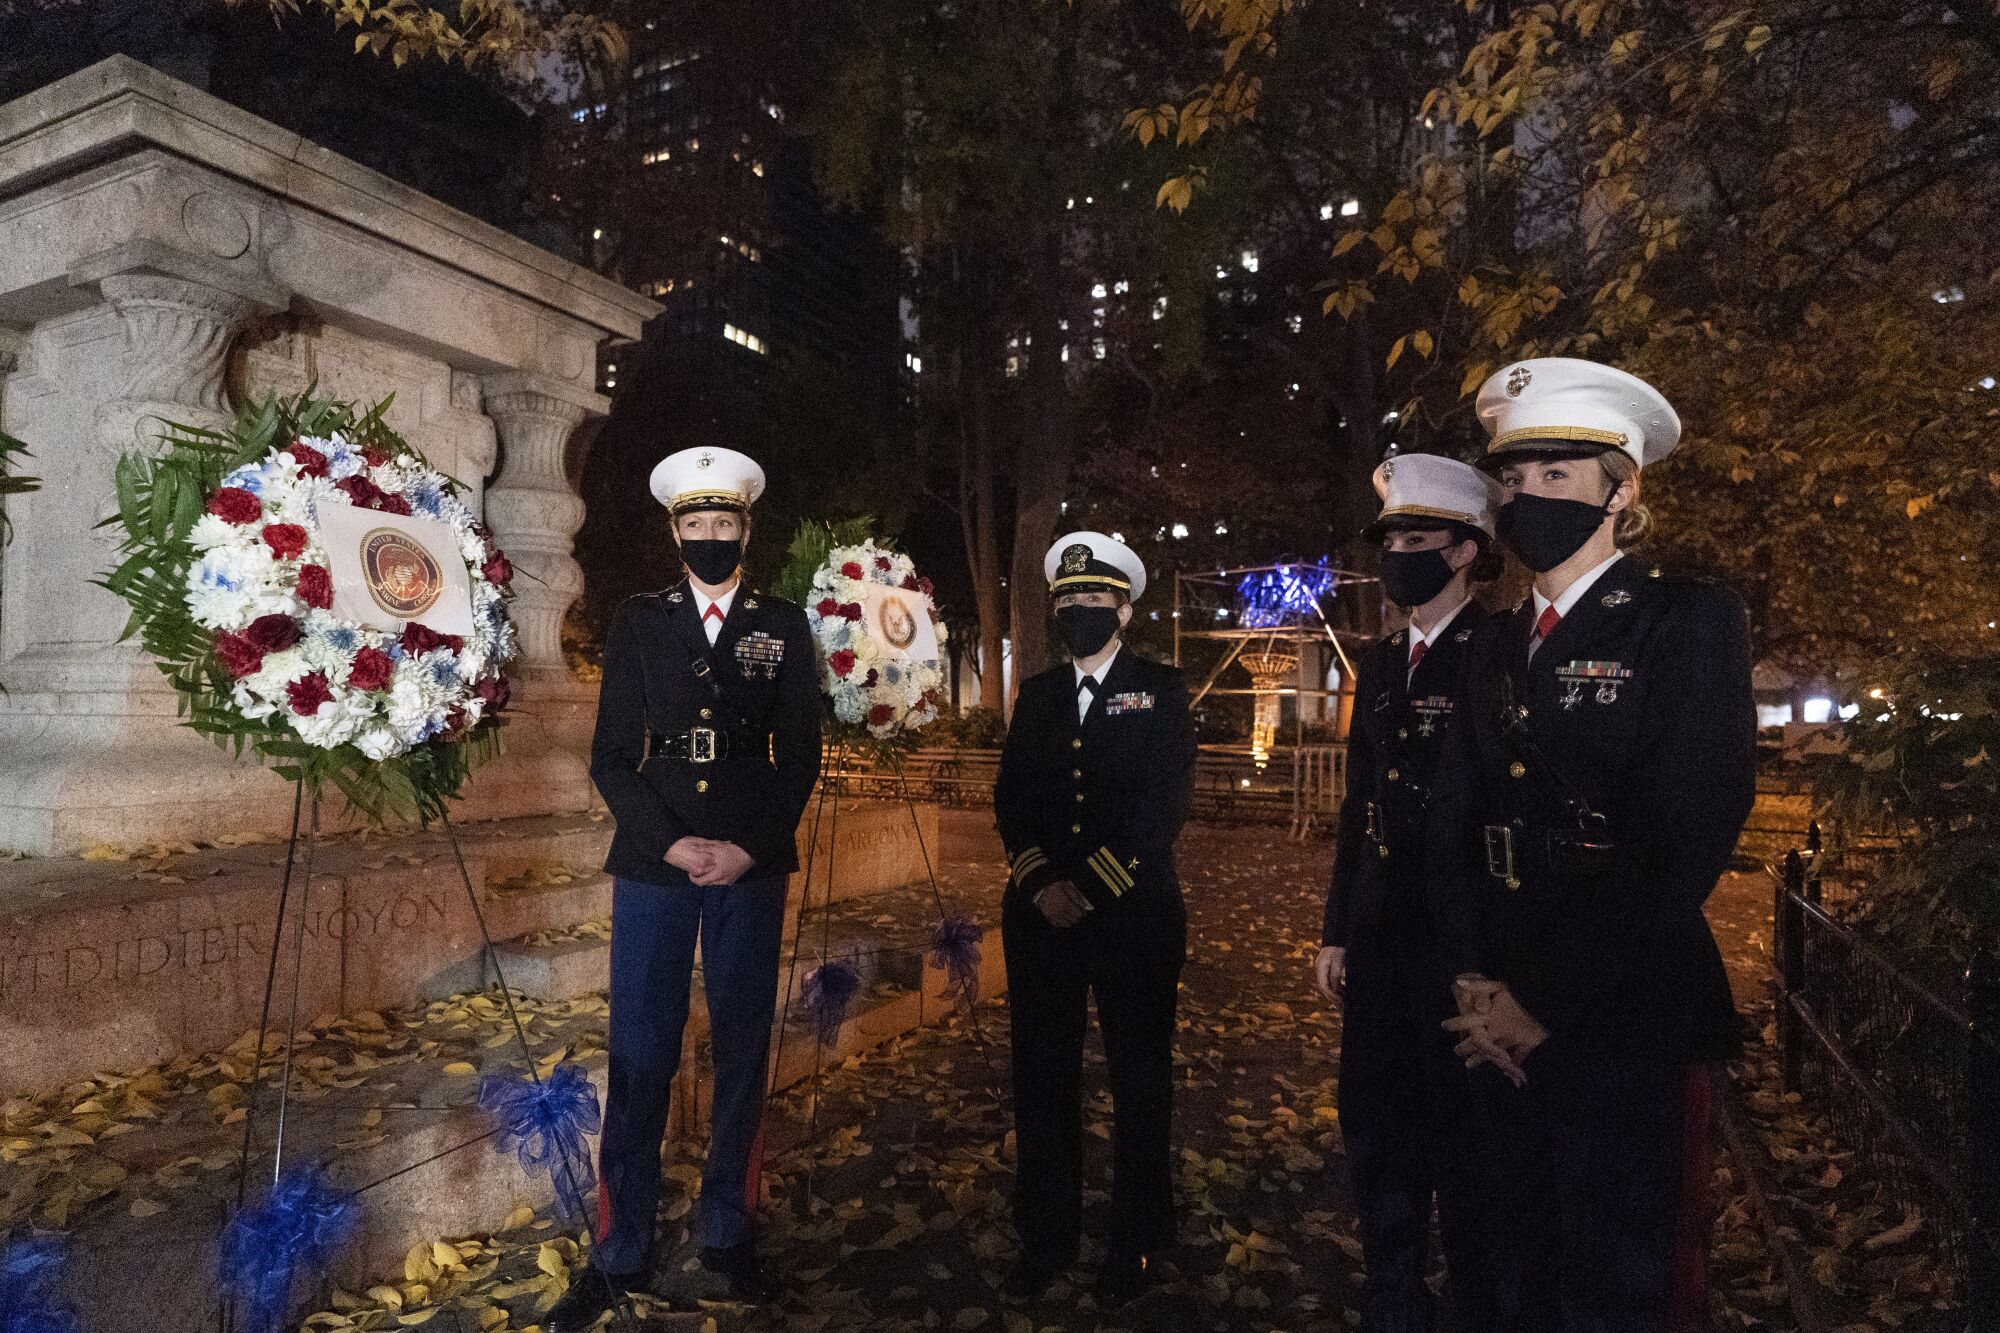 Women in an honor guard stand before wreaths at the Eternal Light Flagstaff in Madison Square Park in New York.